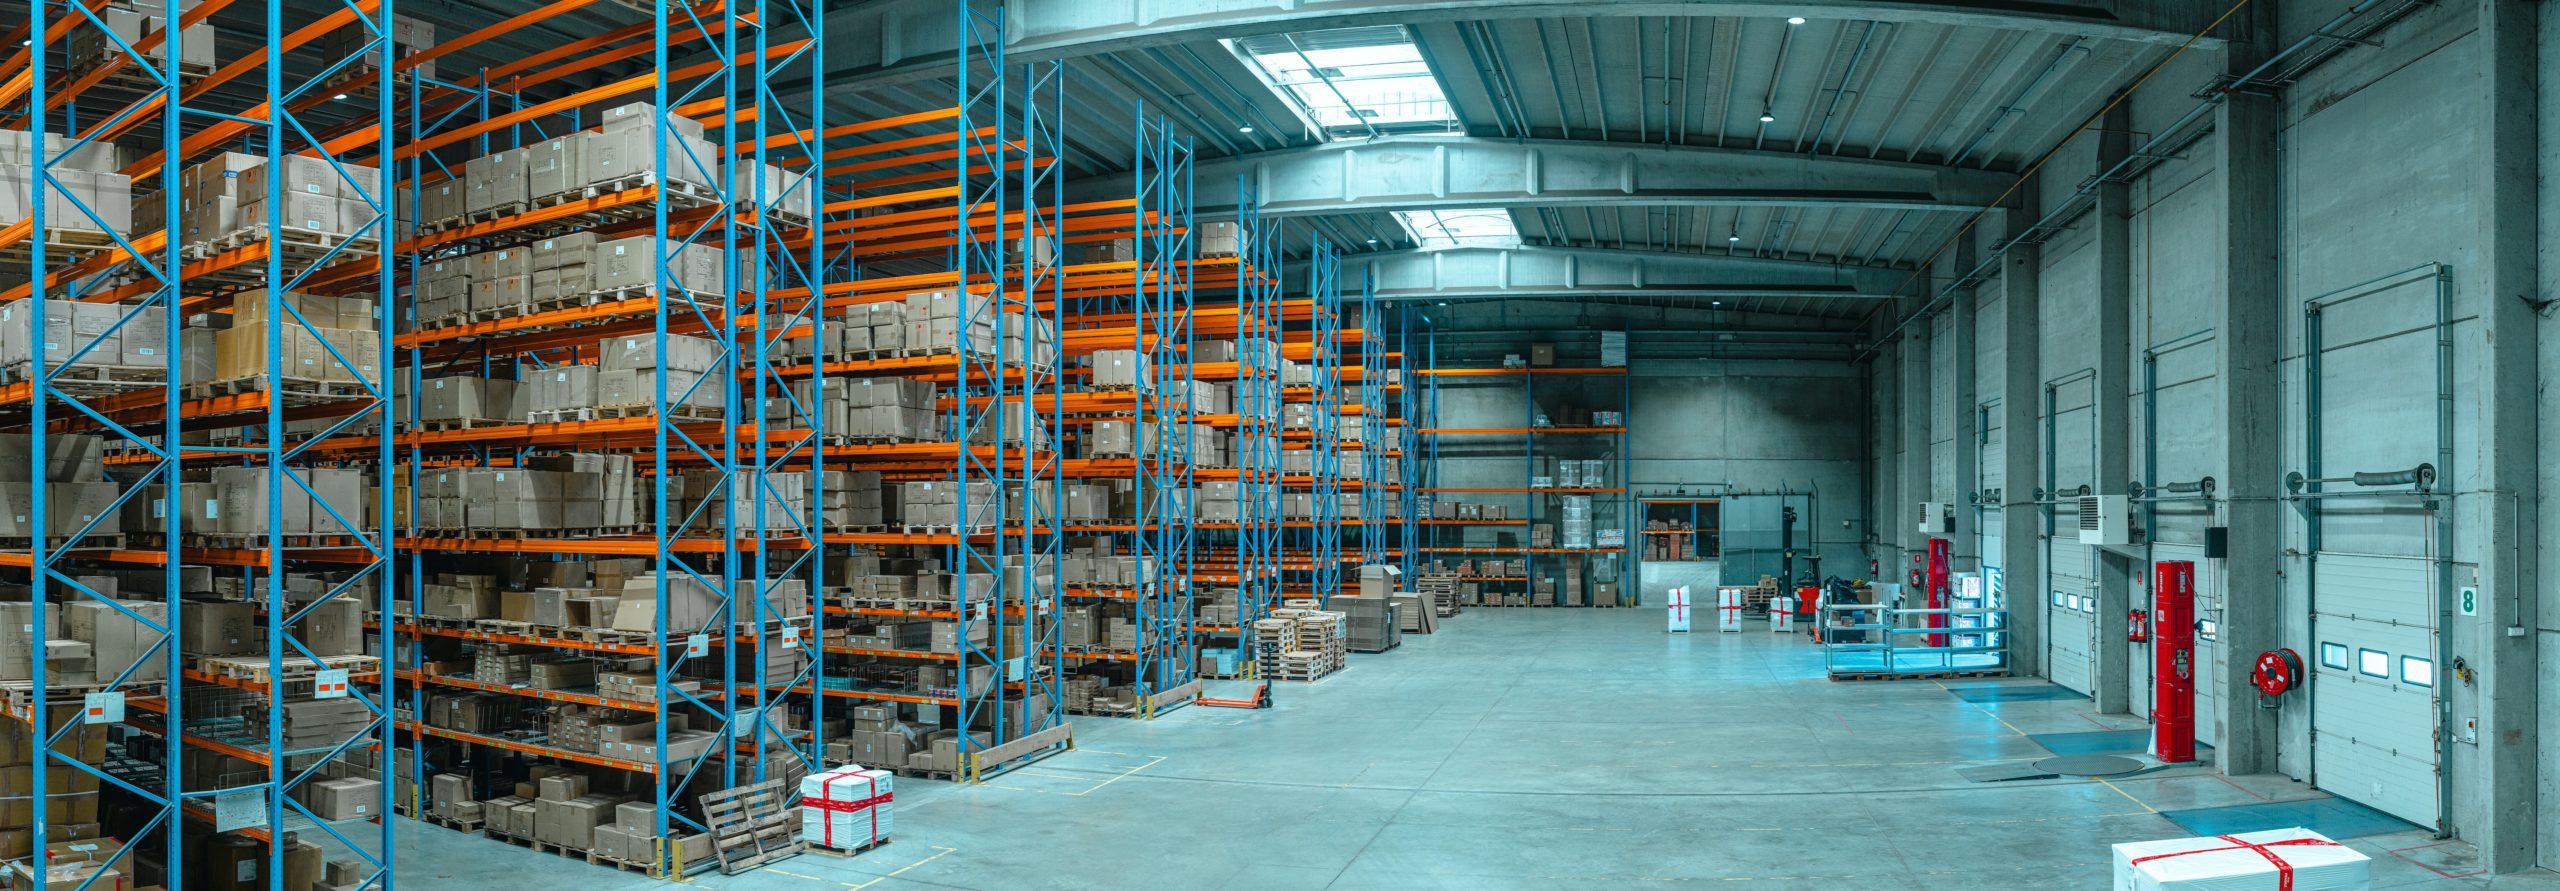 global supply chain shelves with packages in warehouse